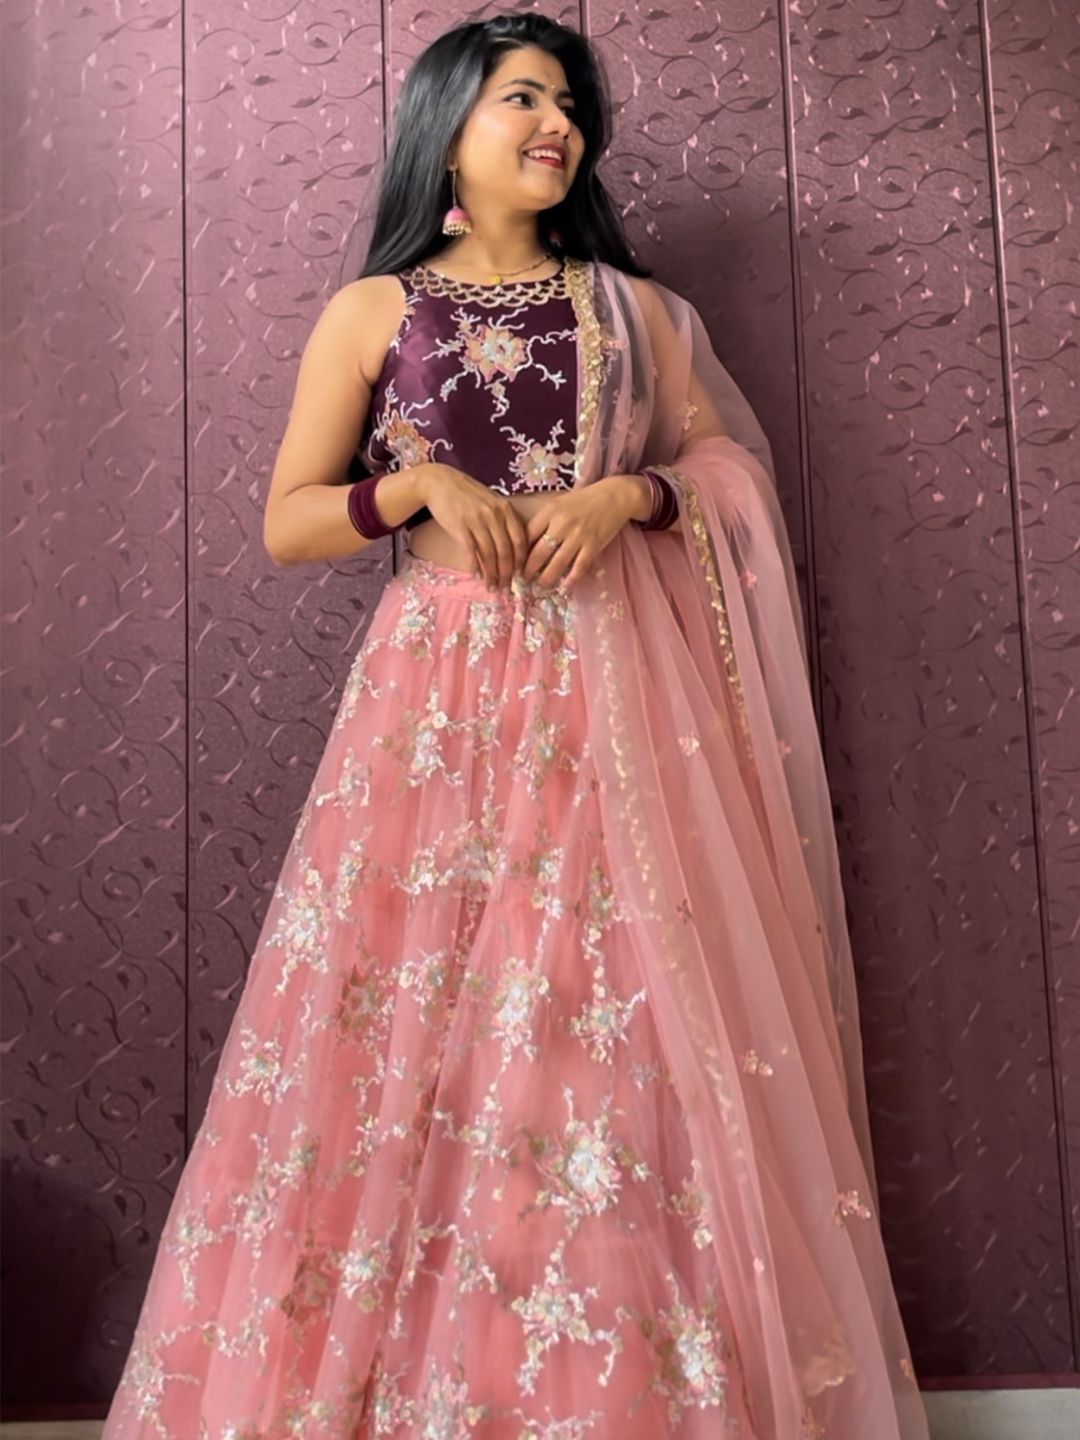 Pink Net Sequin Embroidered Semi-Stitched Lehenga